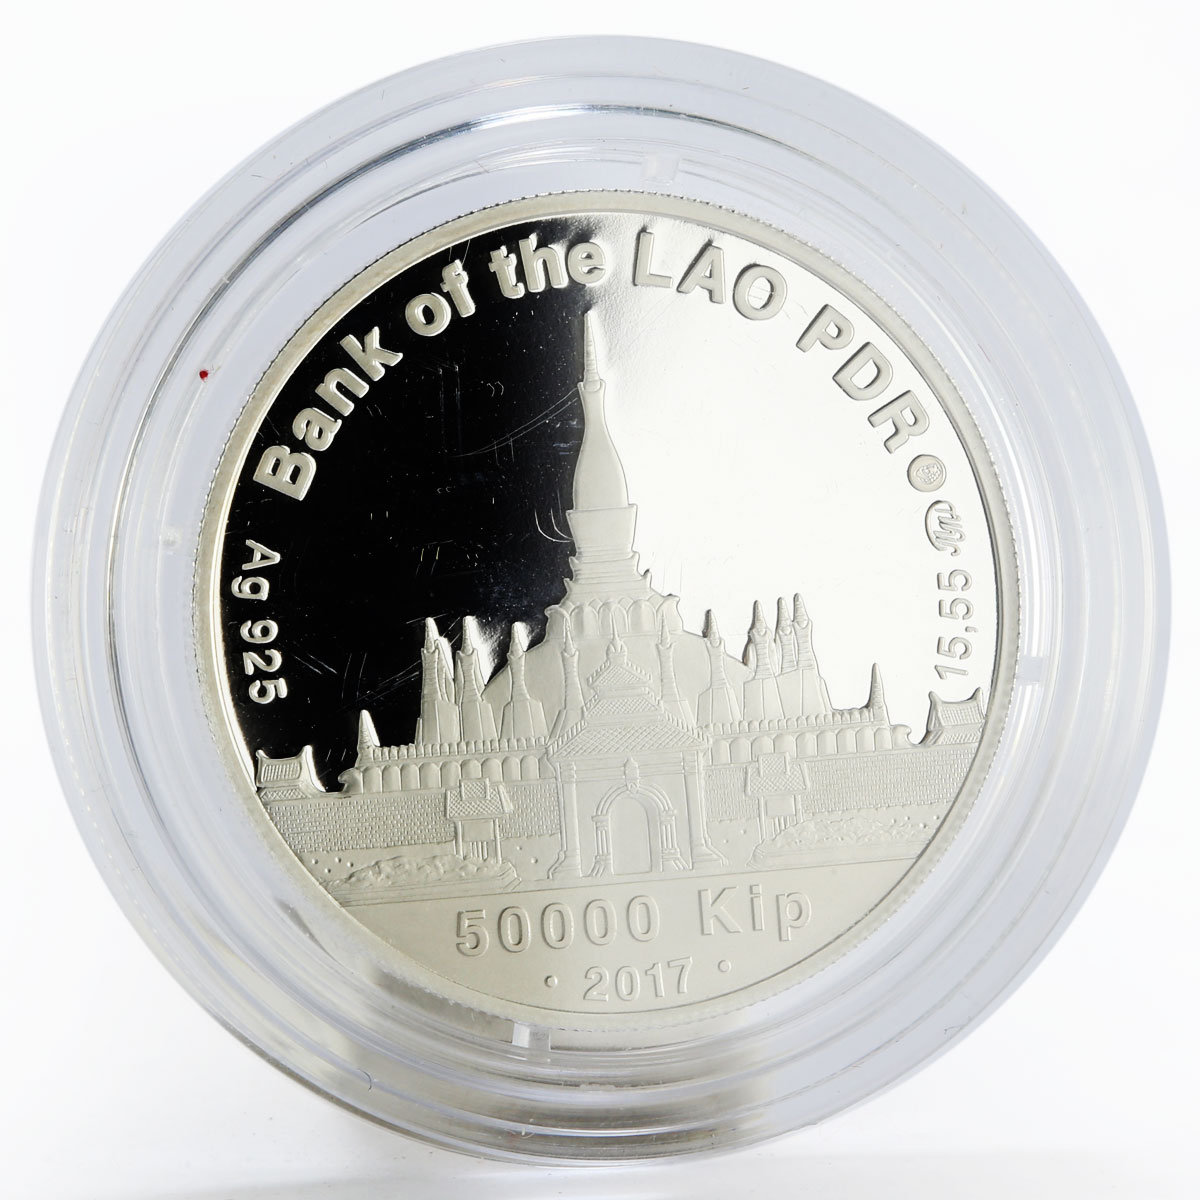 Laos 50000 kip Love colored proof silver coin 2017